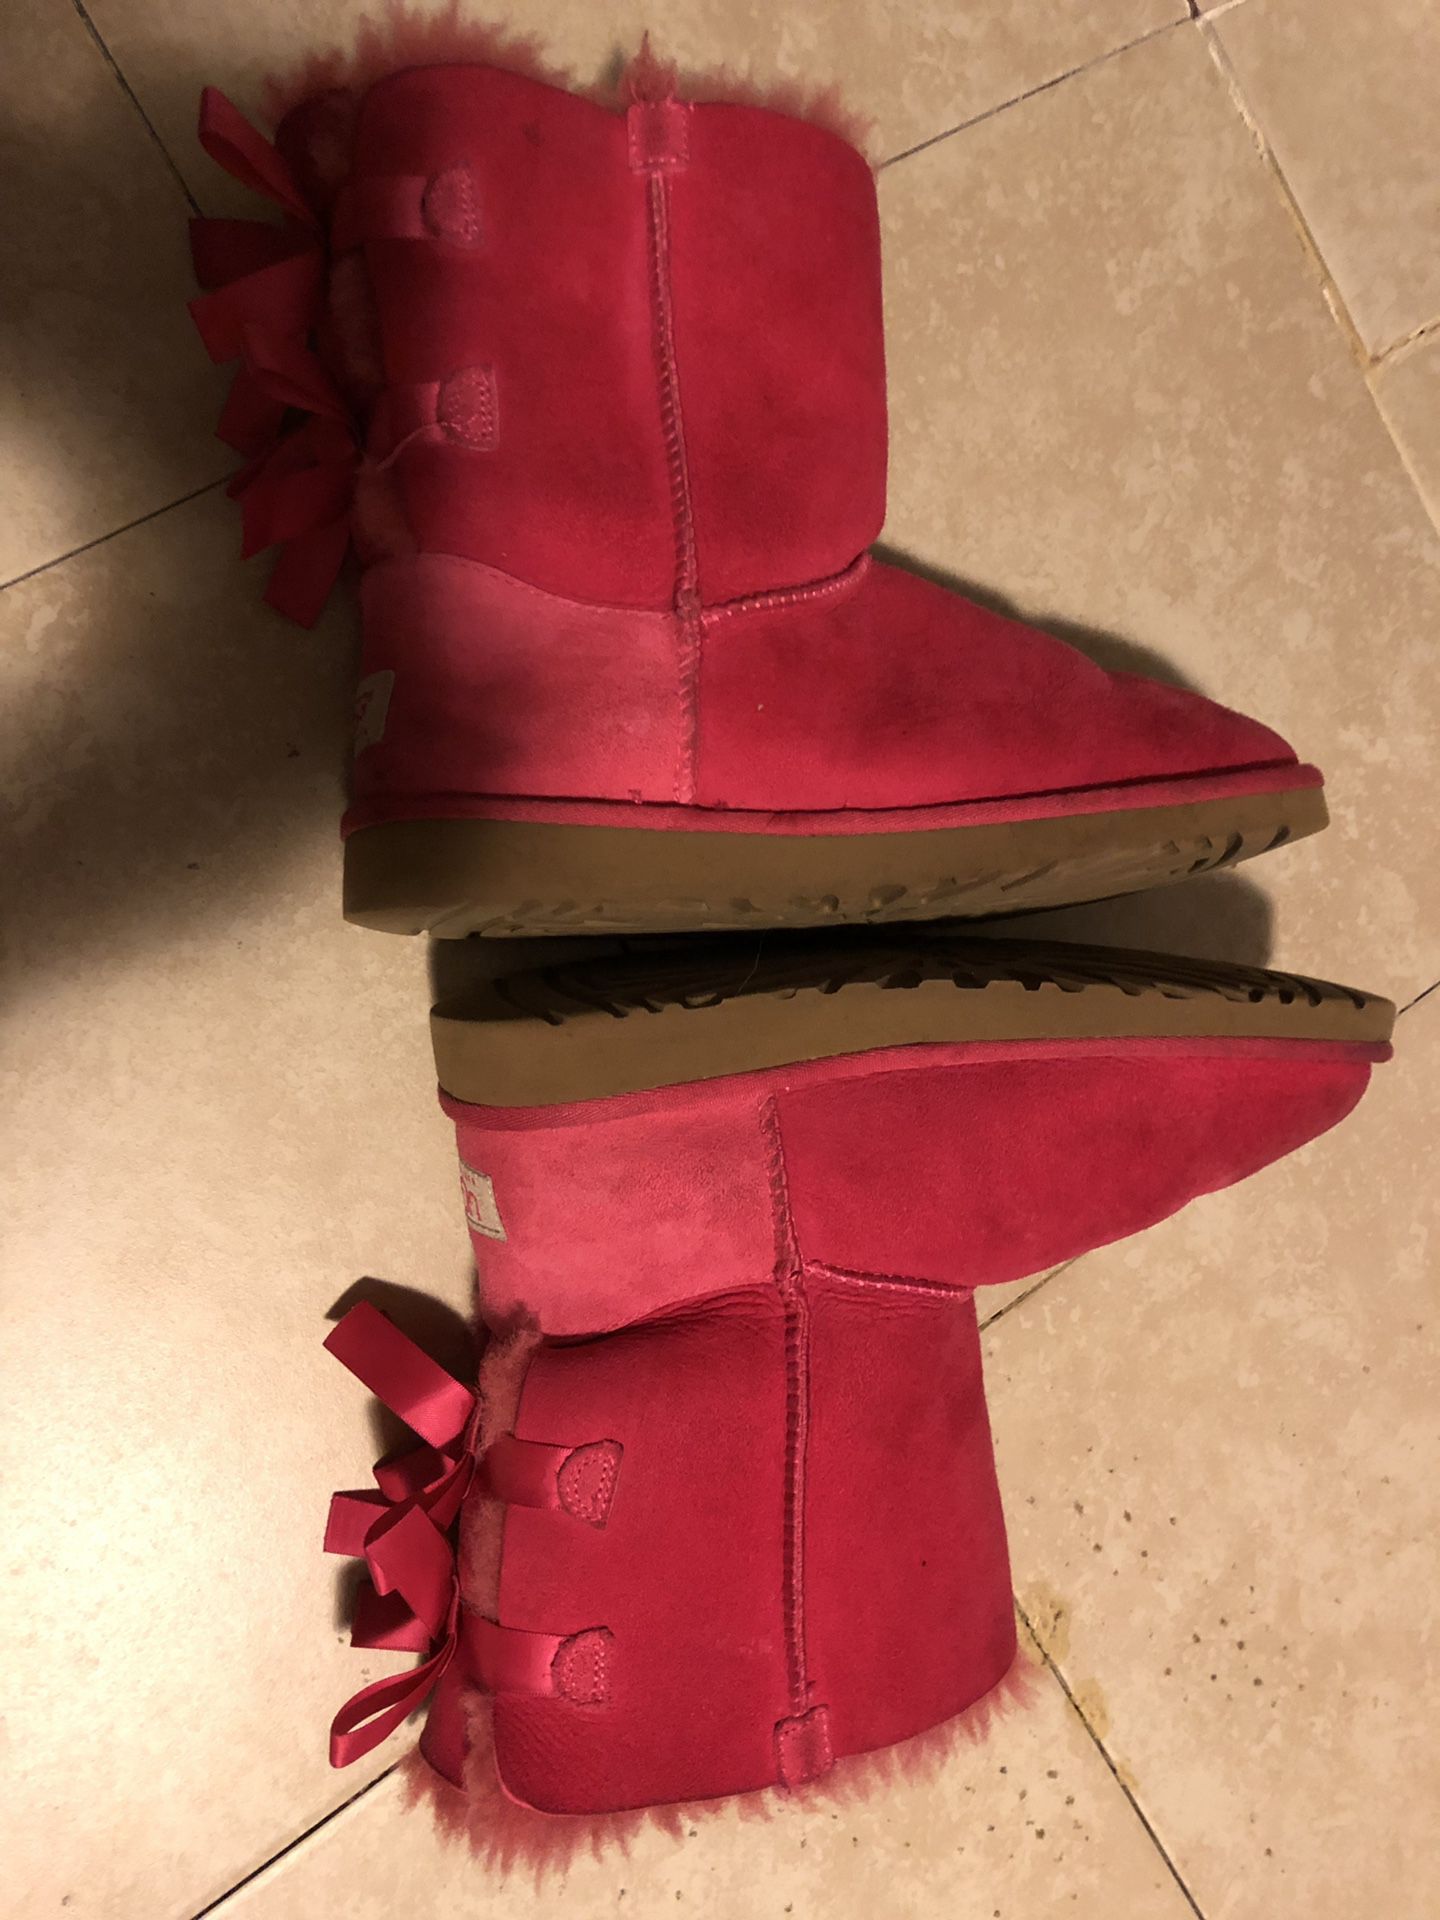 size 6 ugg boots